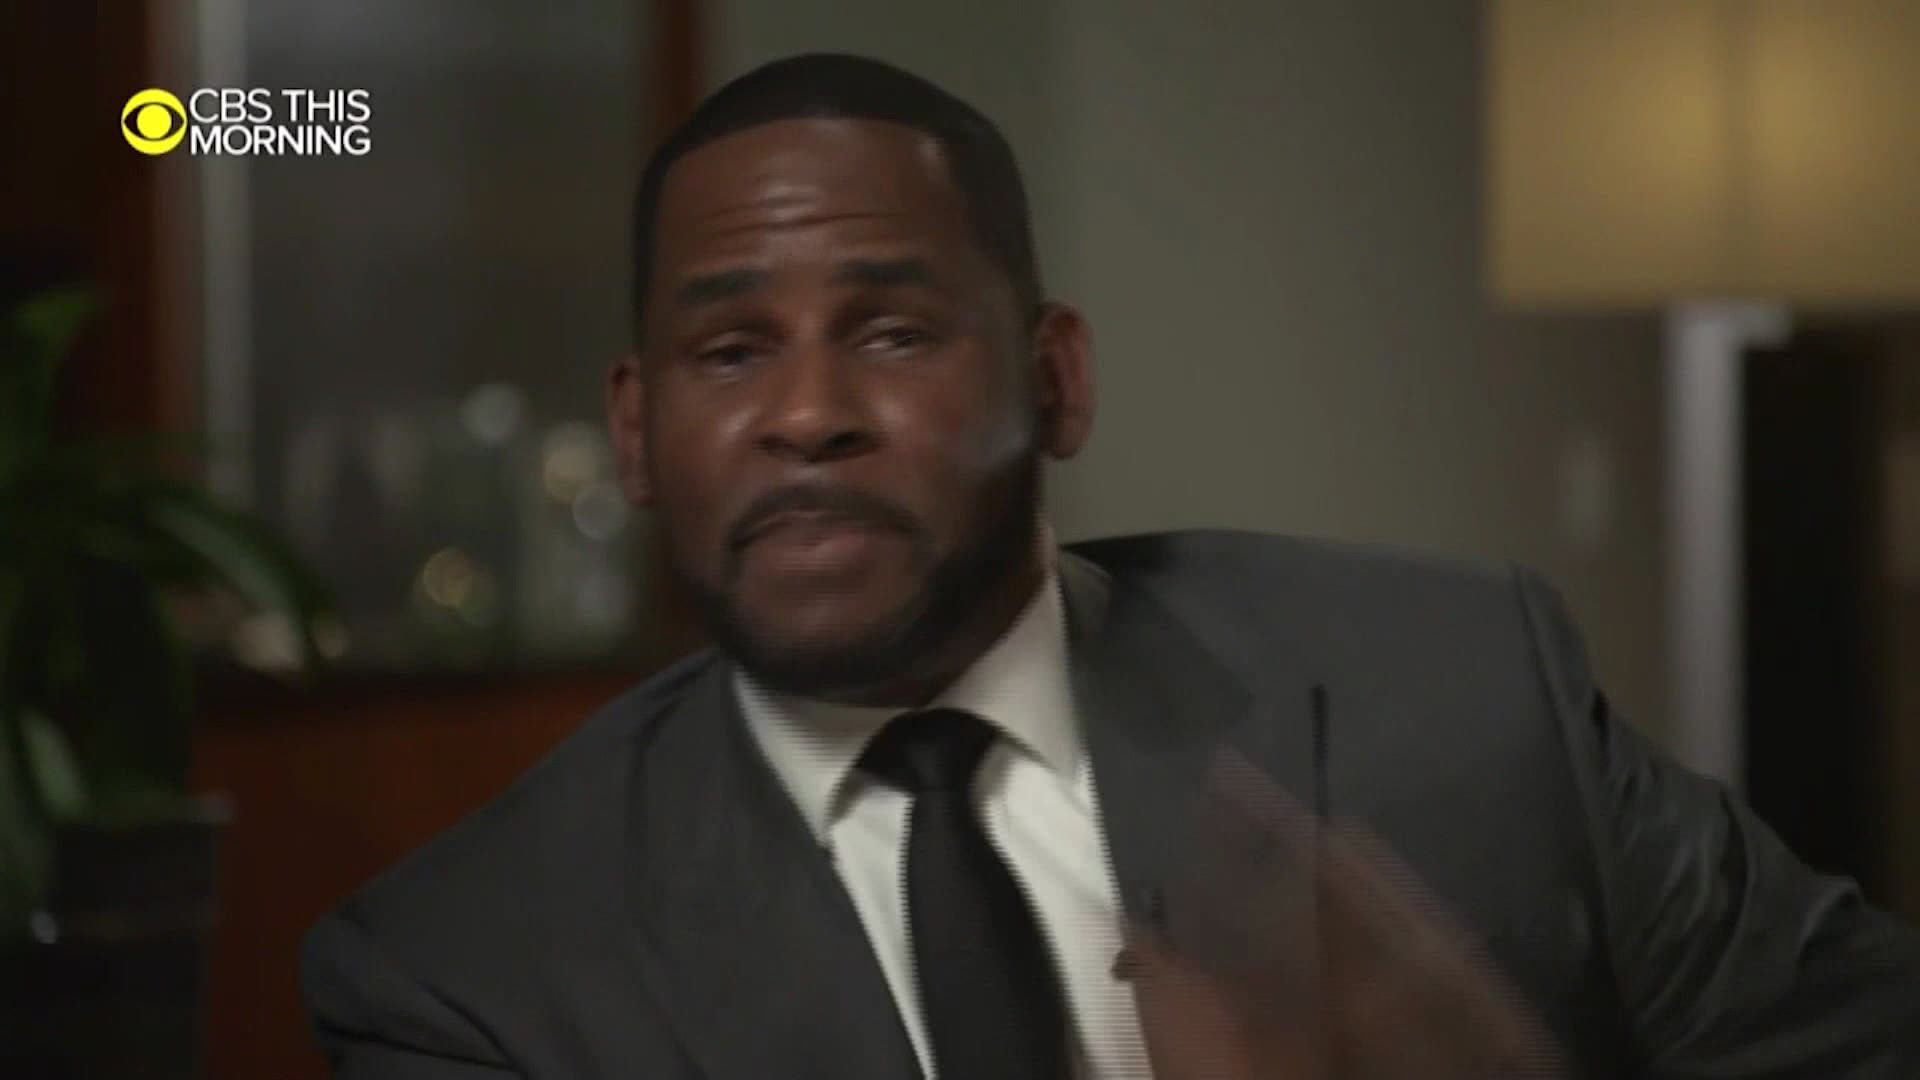 An emotional R. Kelly said he's being "assassinated" and denied sexually abusing women and controlling their lives.